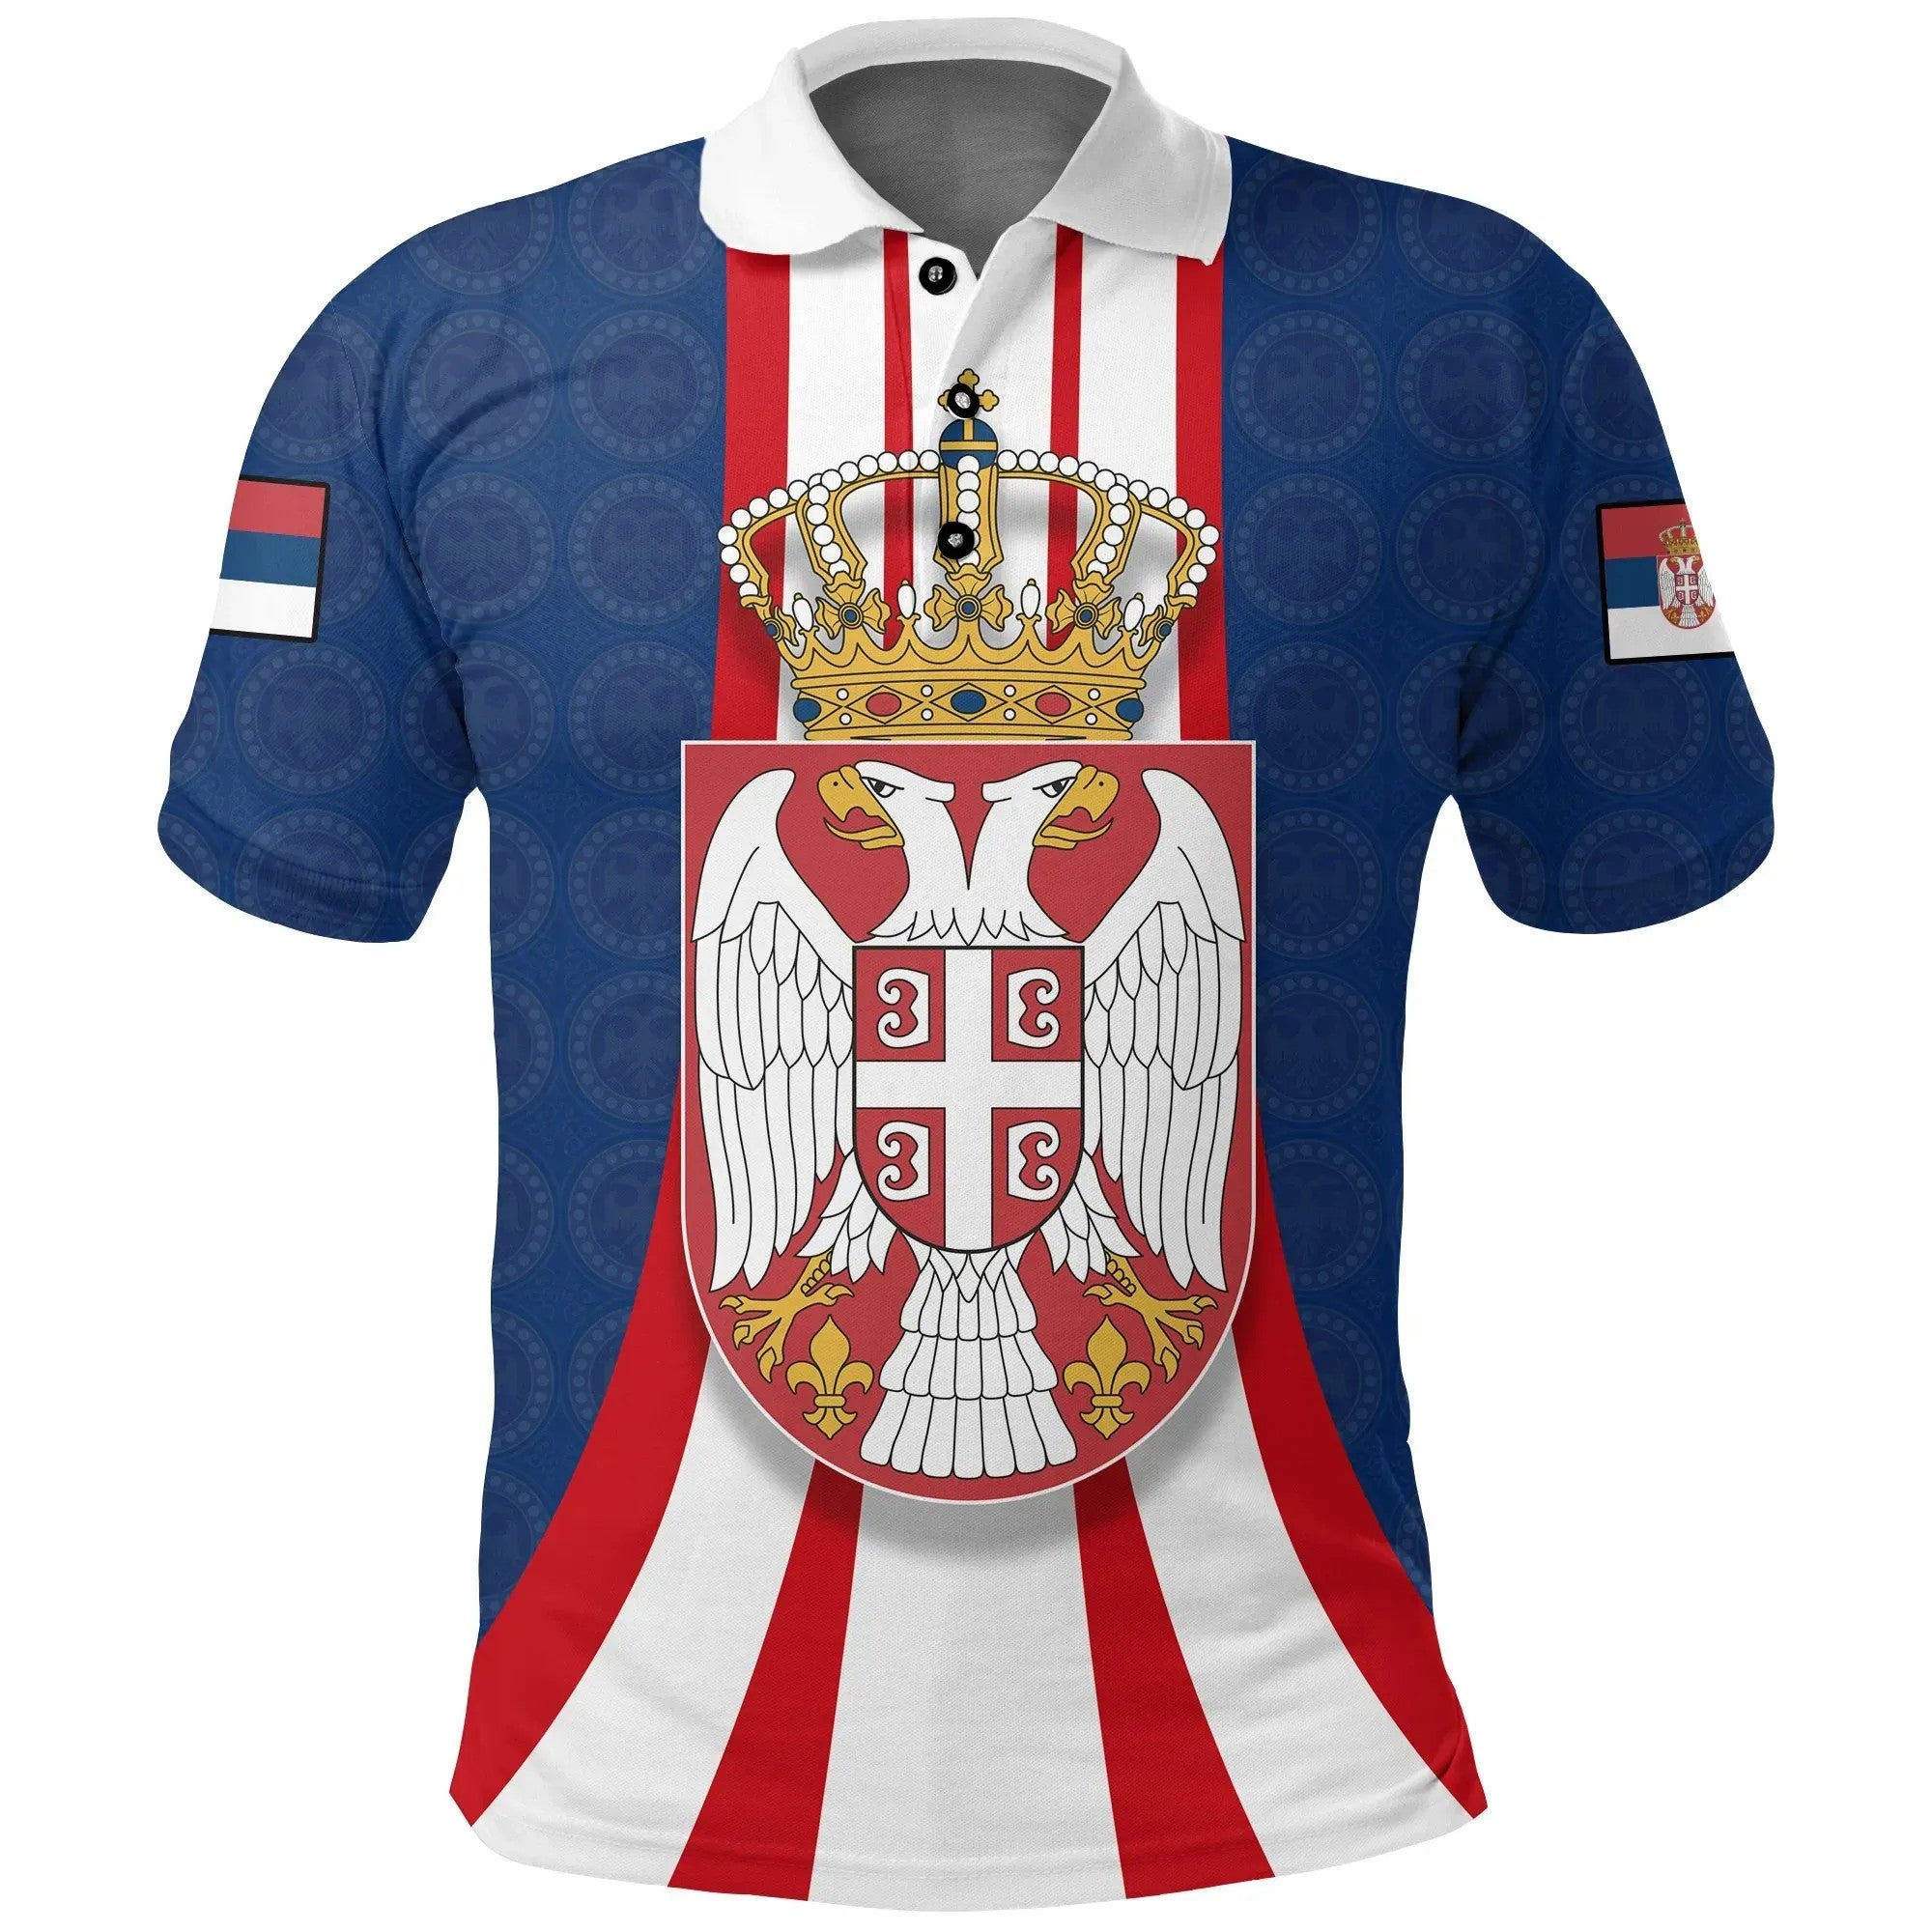 serbia-polo-shirt-victory-day